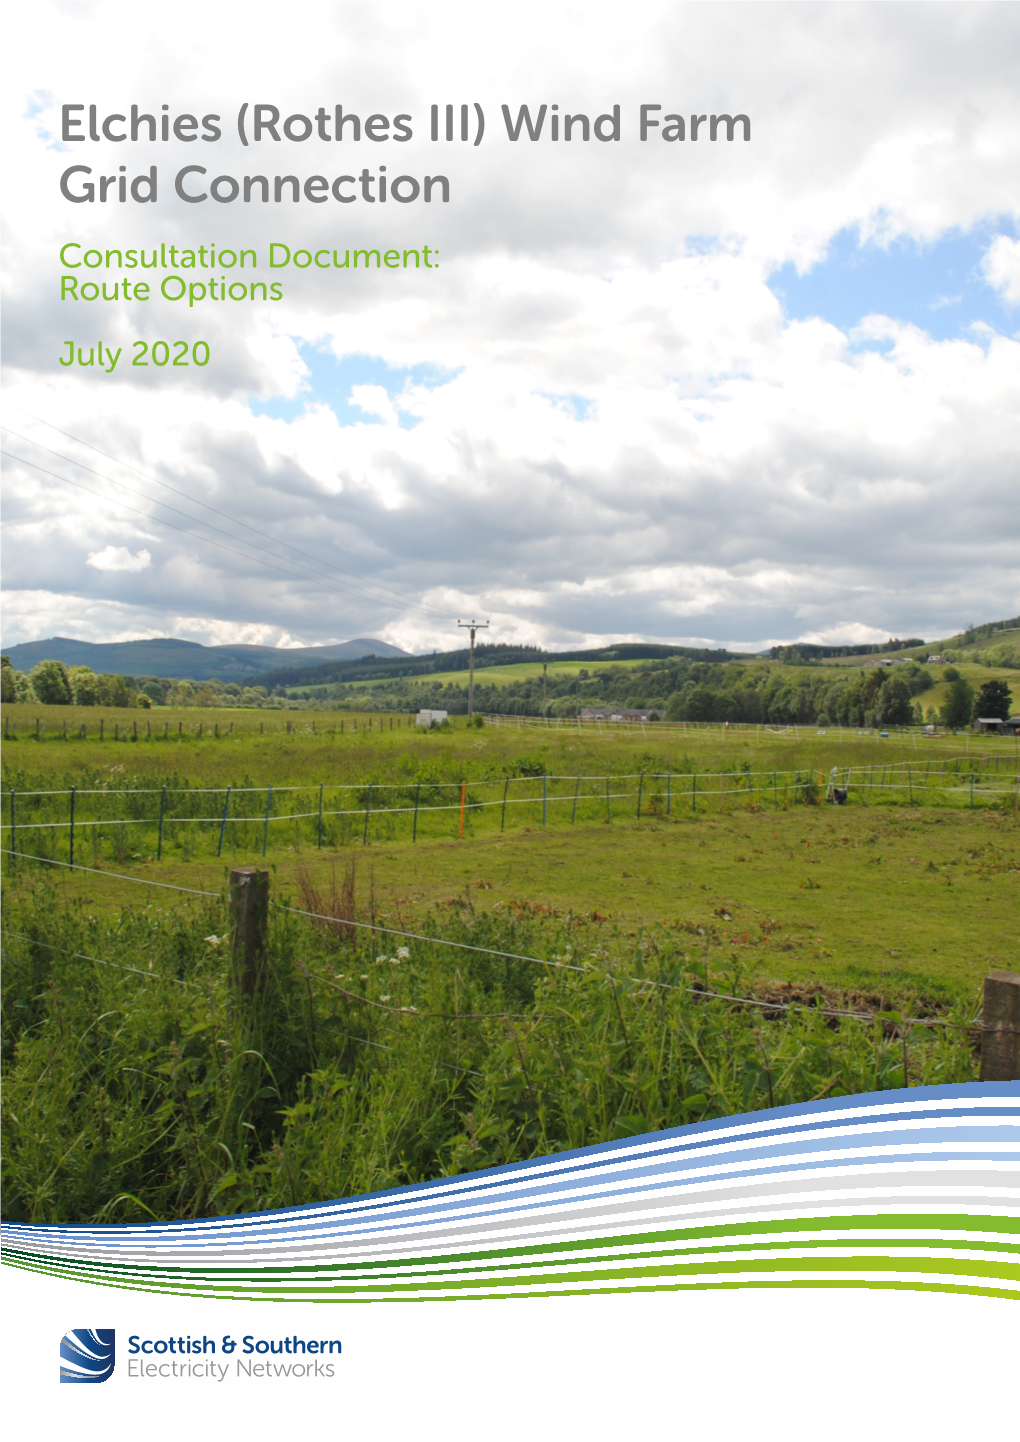 Elchies (Rothes III) Wind Farm Grid Connection Consultation Document: Route Options July 2020